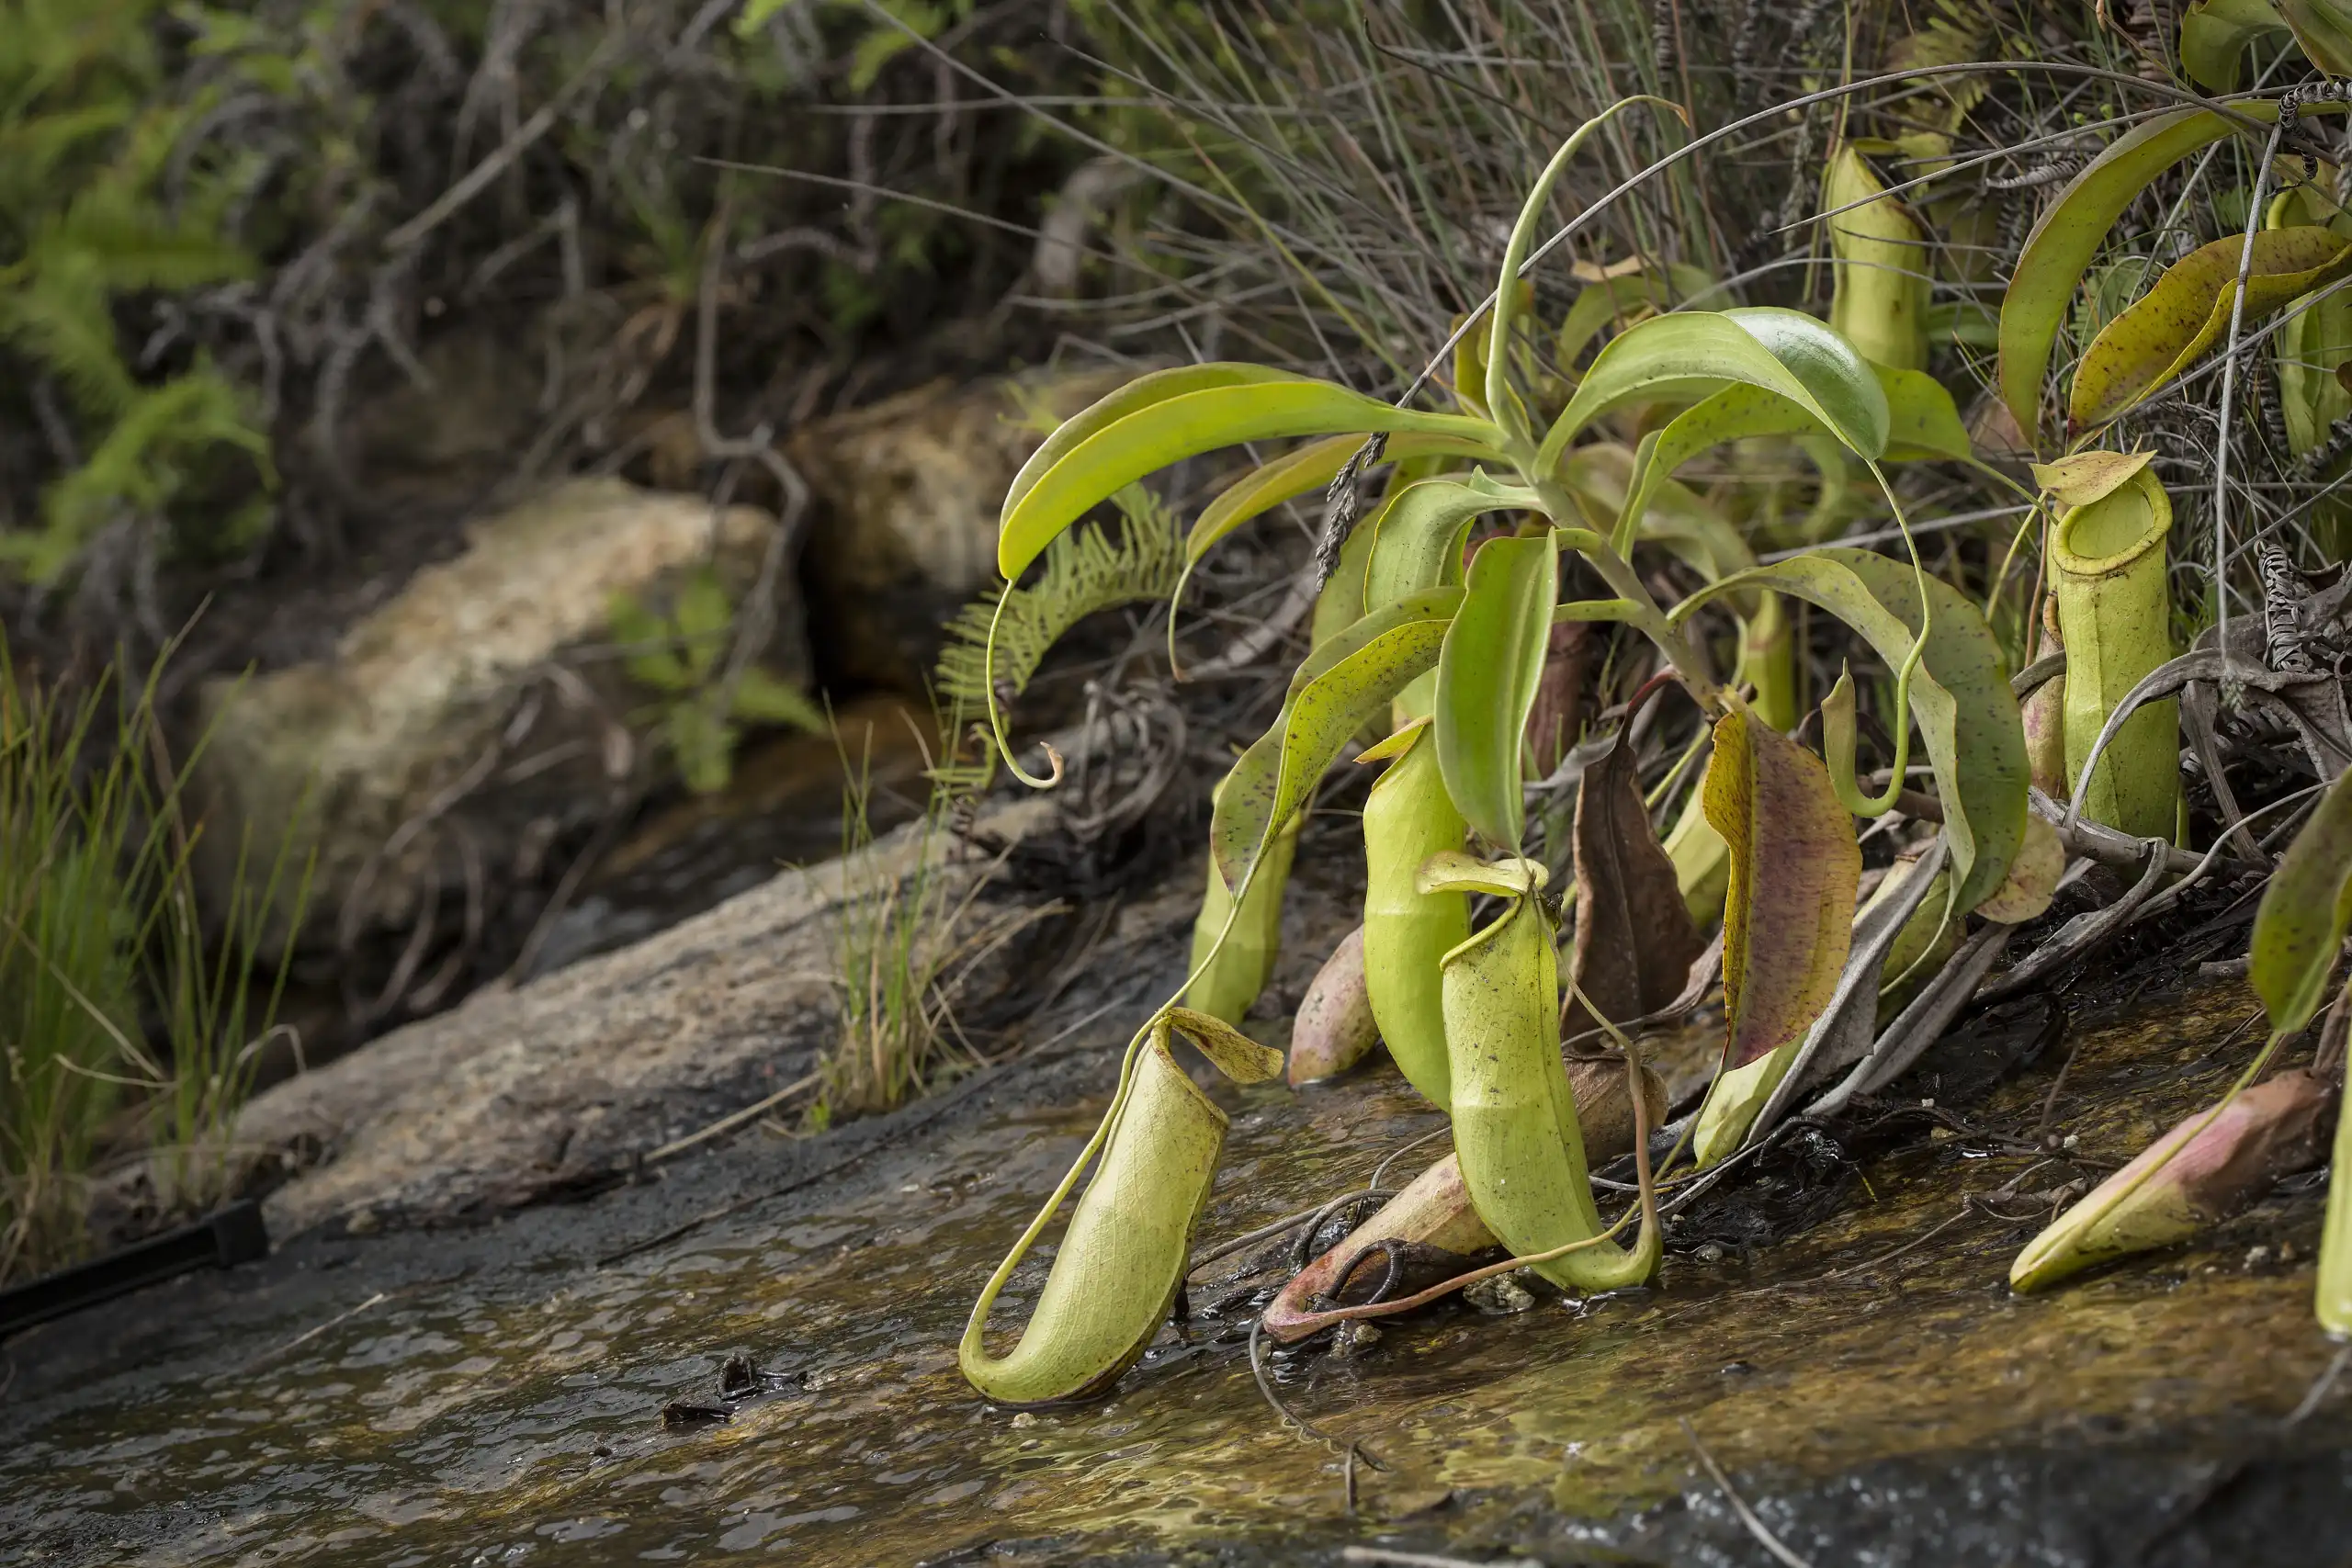 Nepenthes mirabilis plant growing on Coloane Island in Macau.